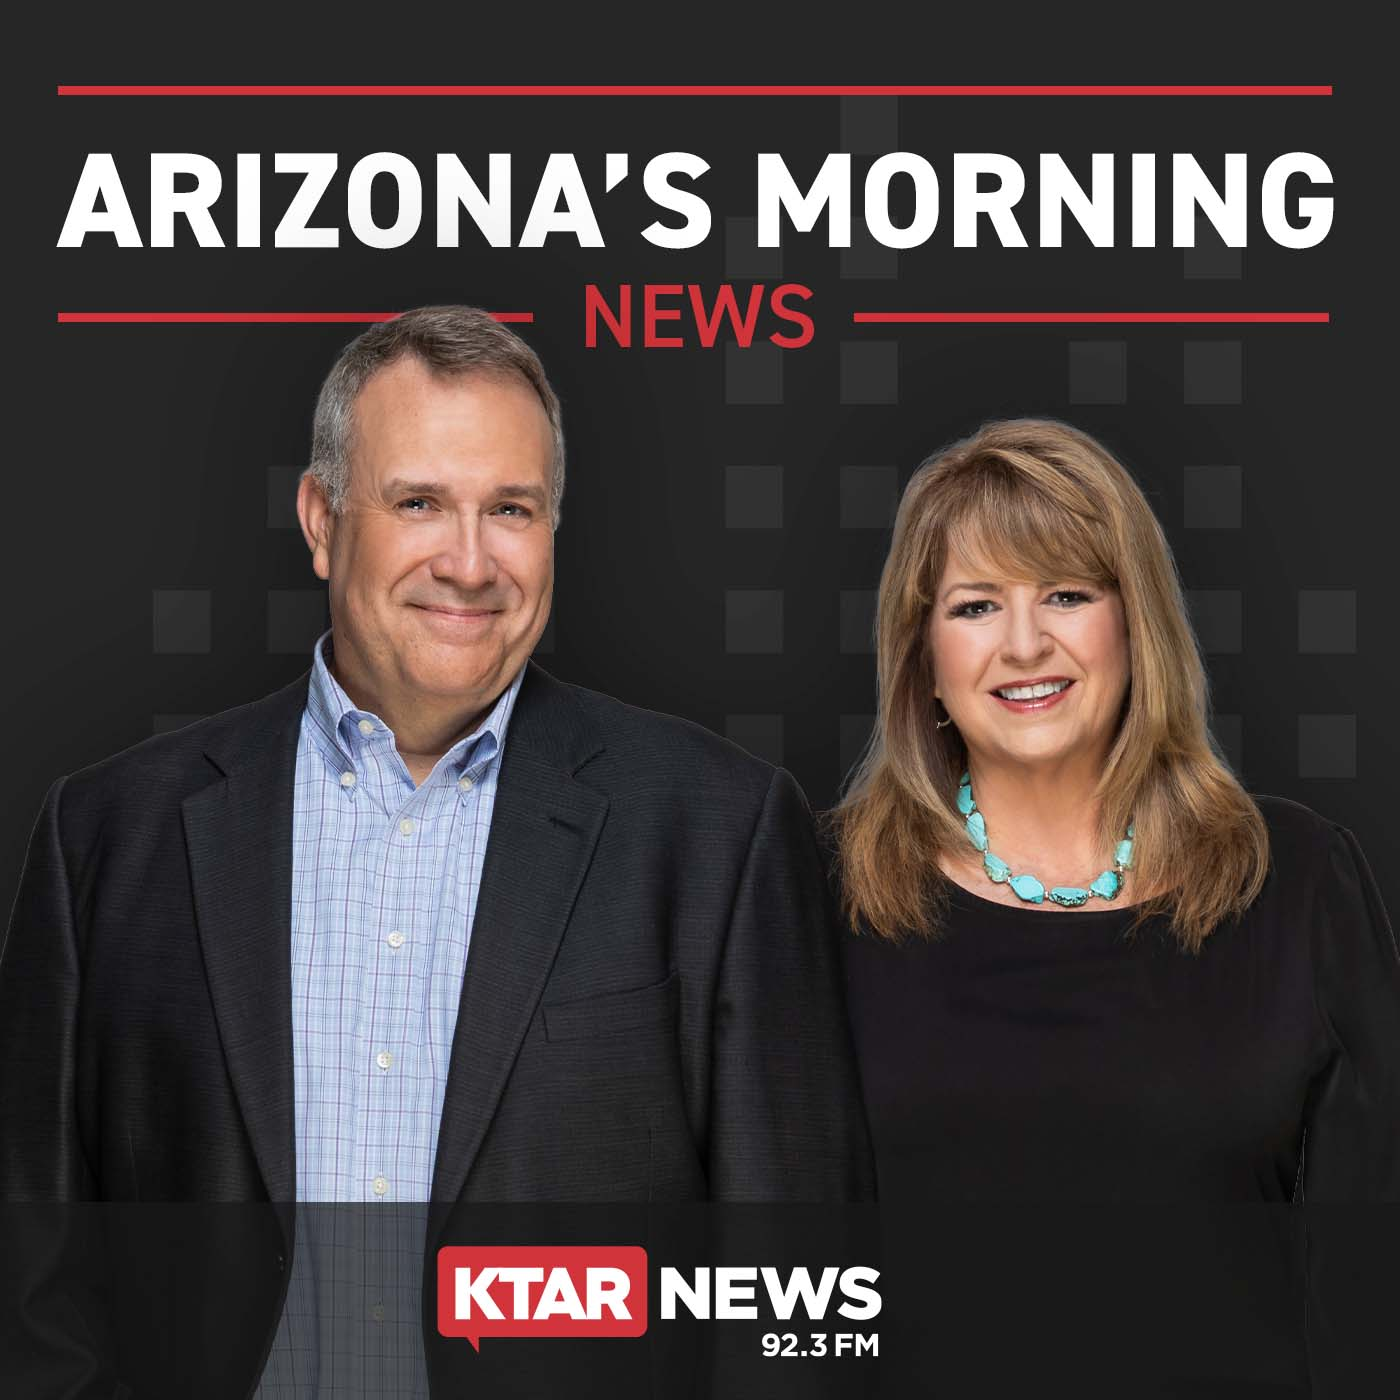 Sharper Point Commentary - Arizona's vaccine situation